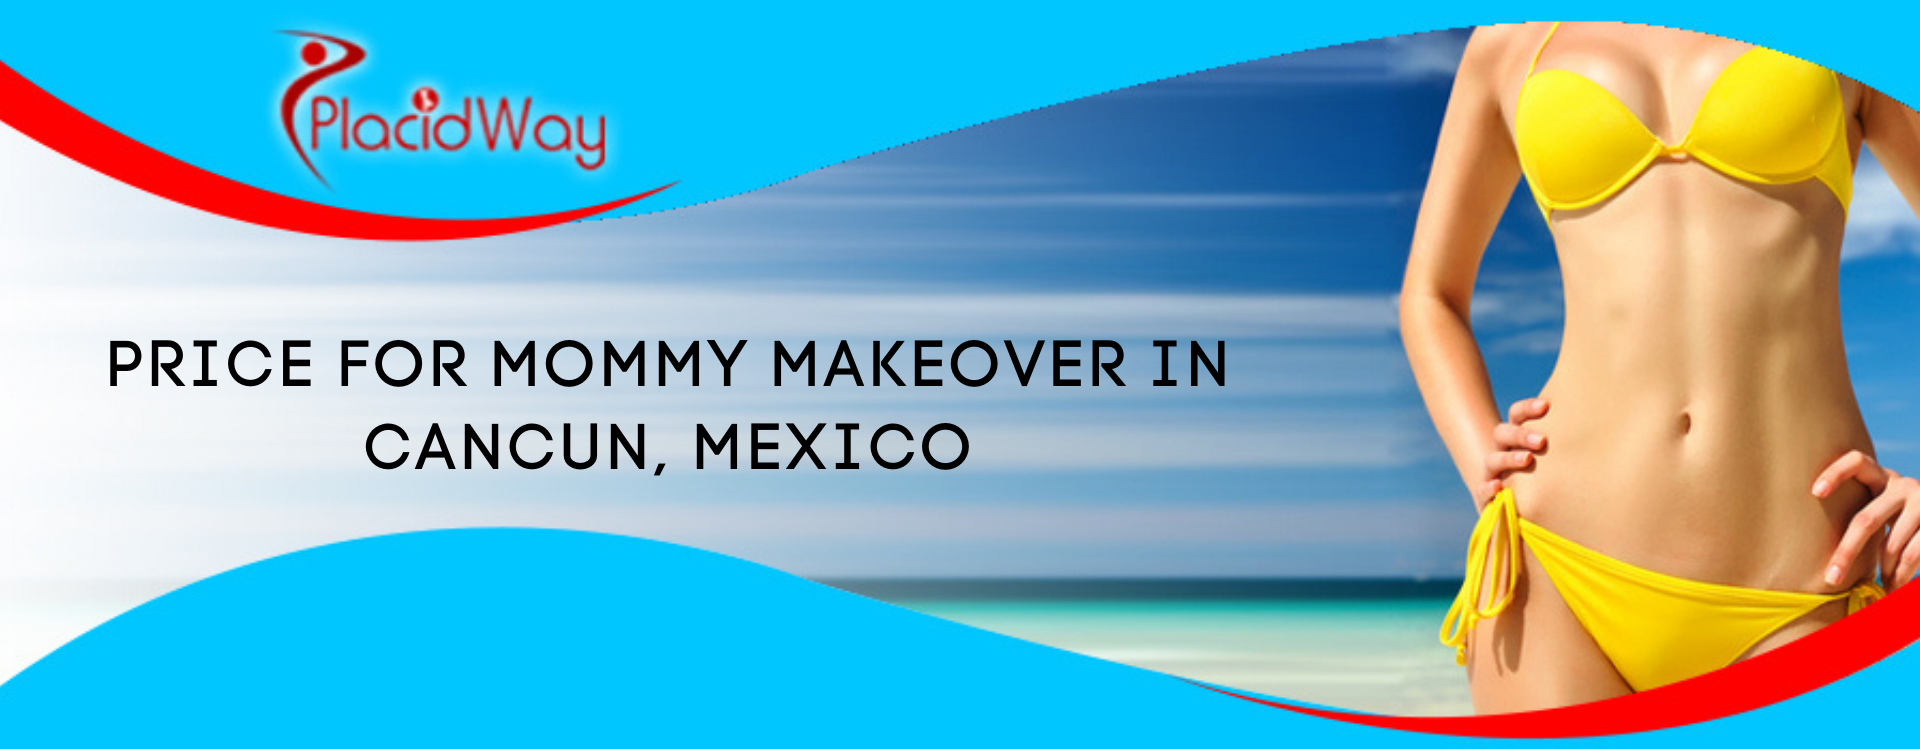 How Much Does Mommy Makeover Cost In Cancun Mexico 